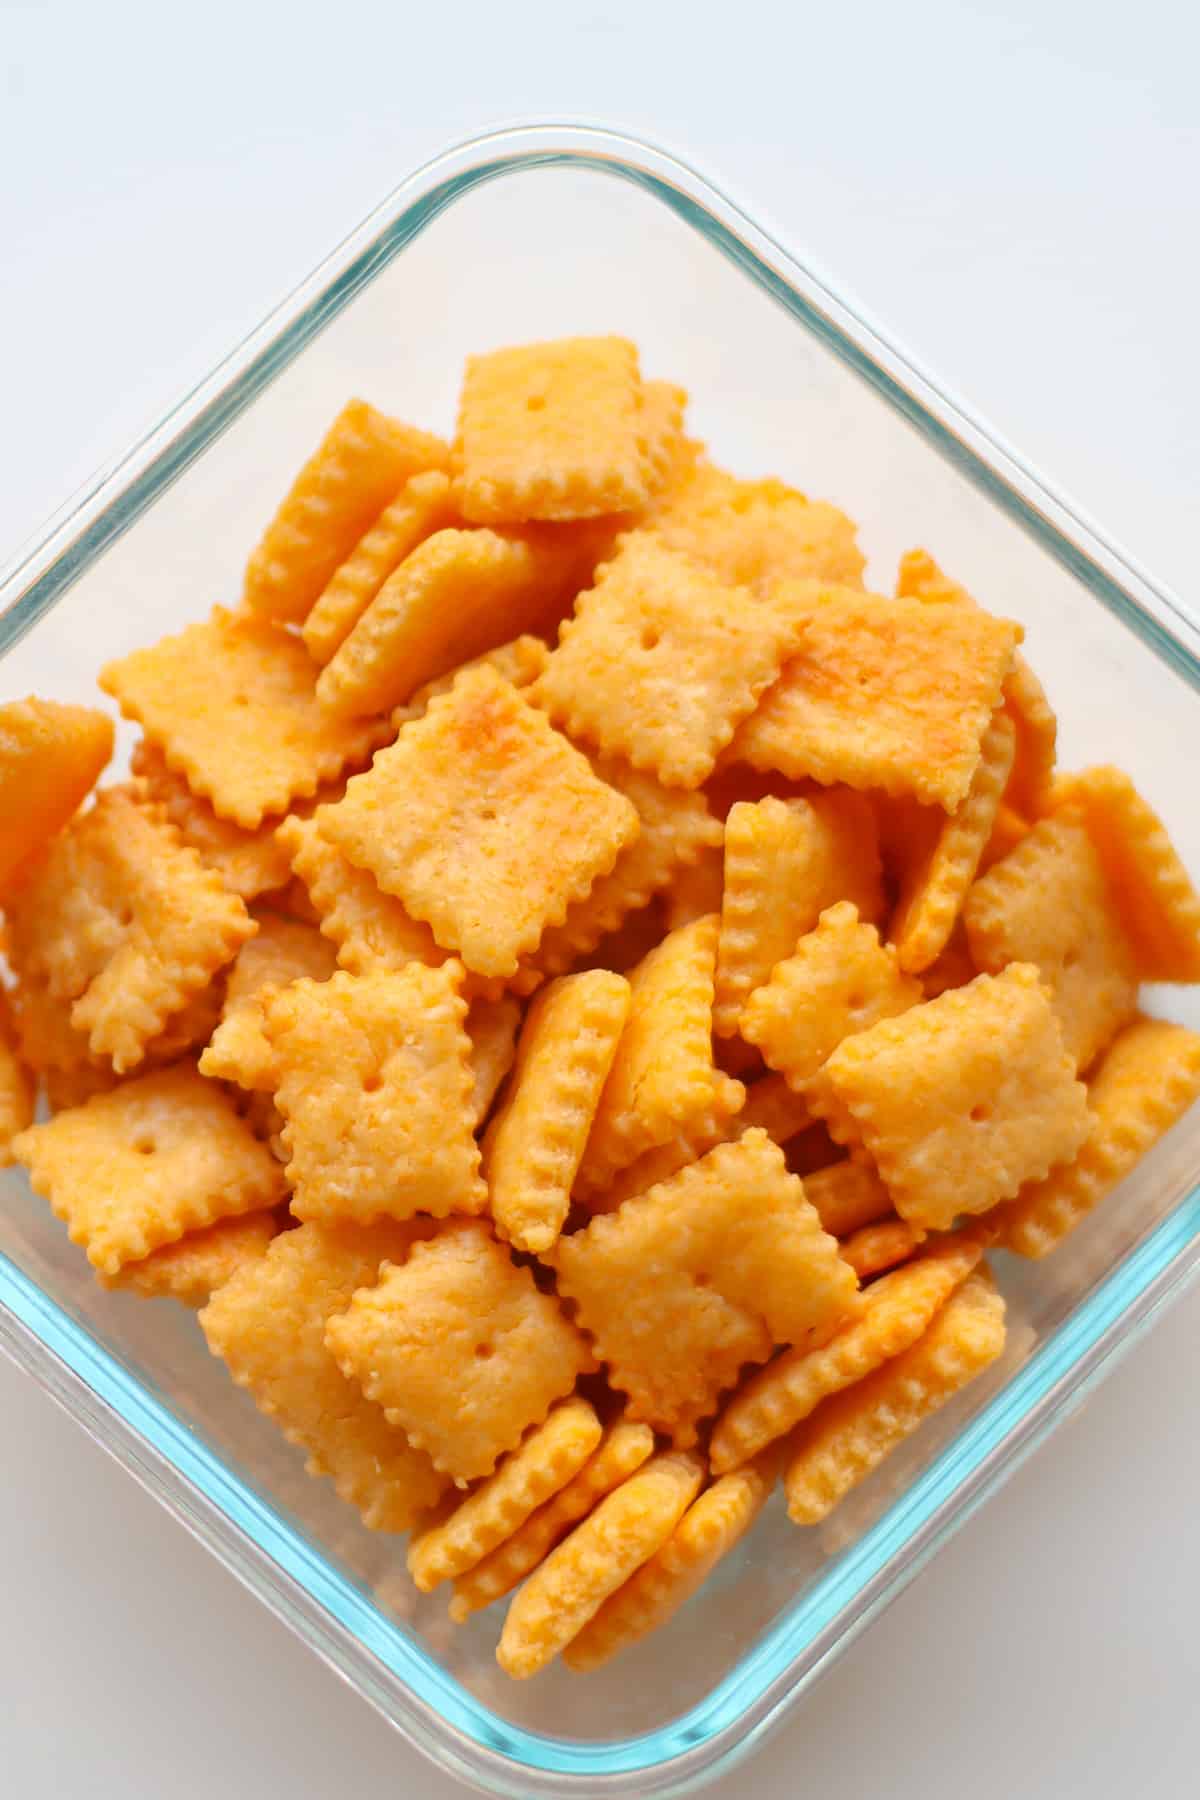 Crackers in a glass container.